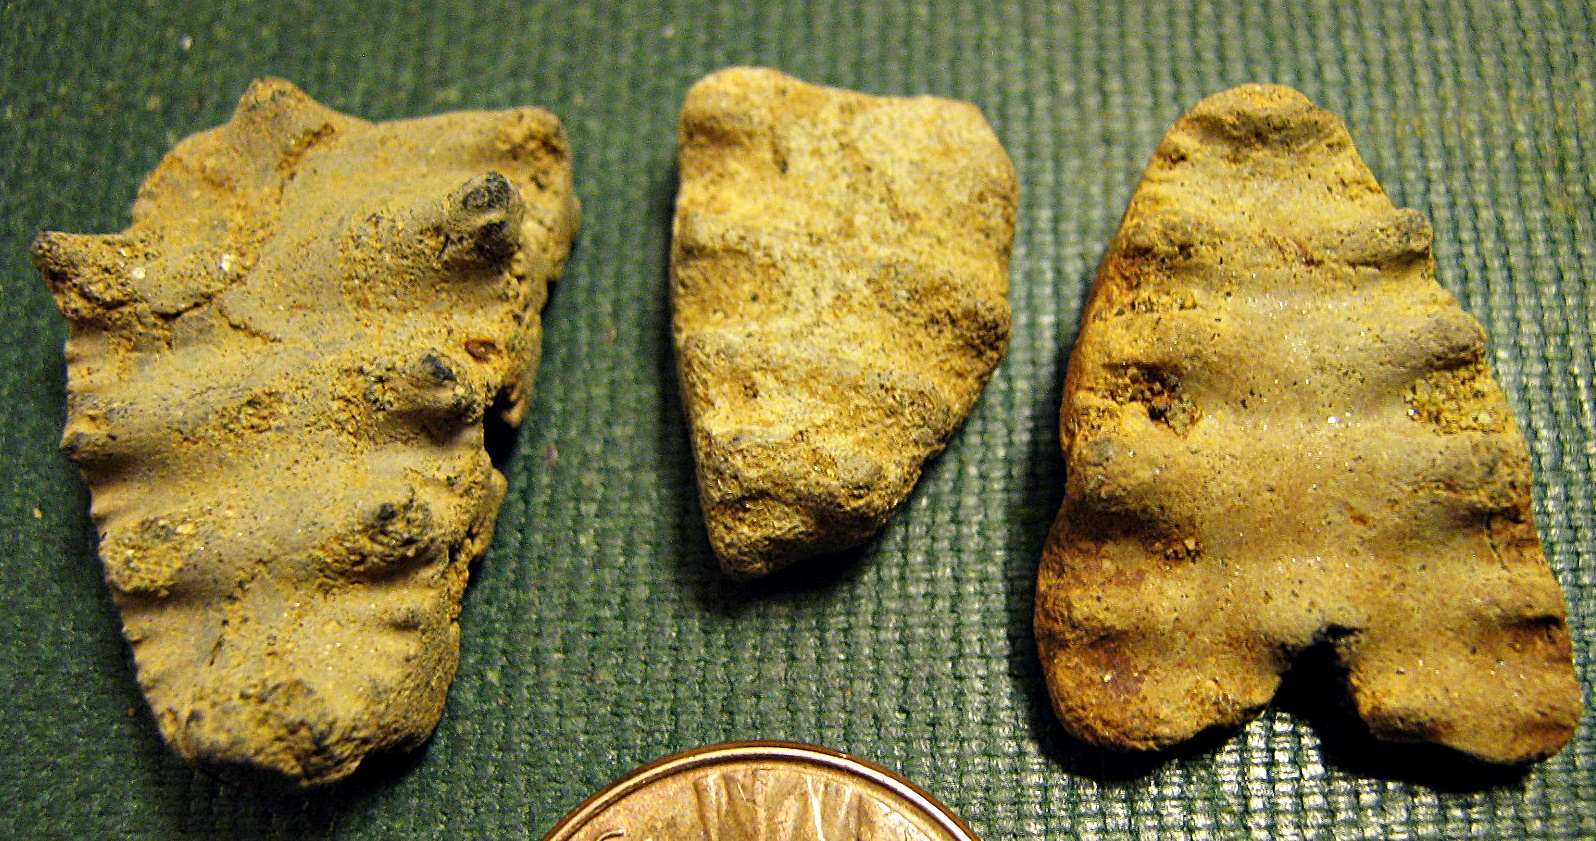 Ammonite pieces from New Jersey